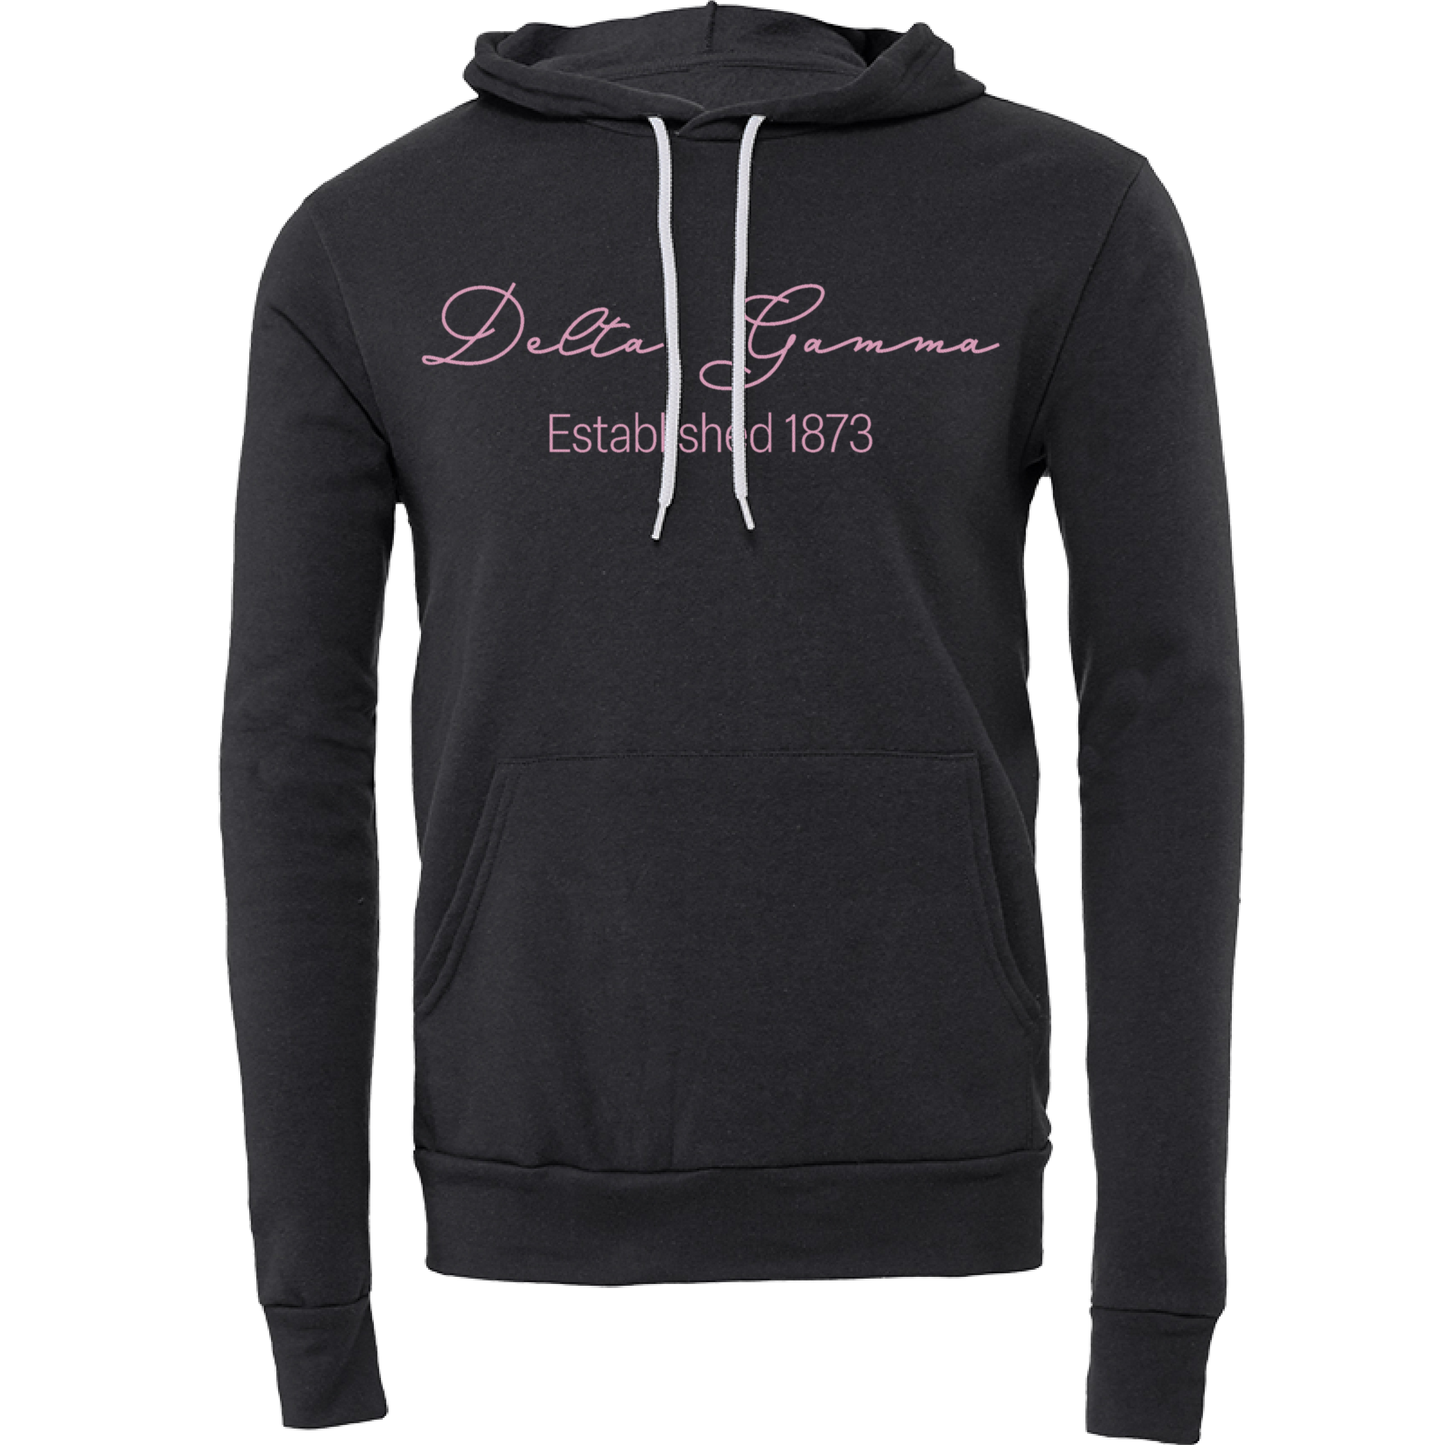 Delta Gamma Embroidered Scripted Name Hooded Sweatshirts